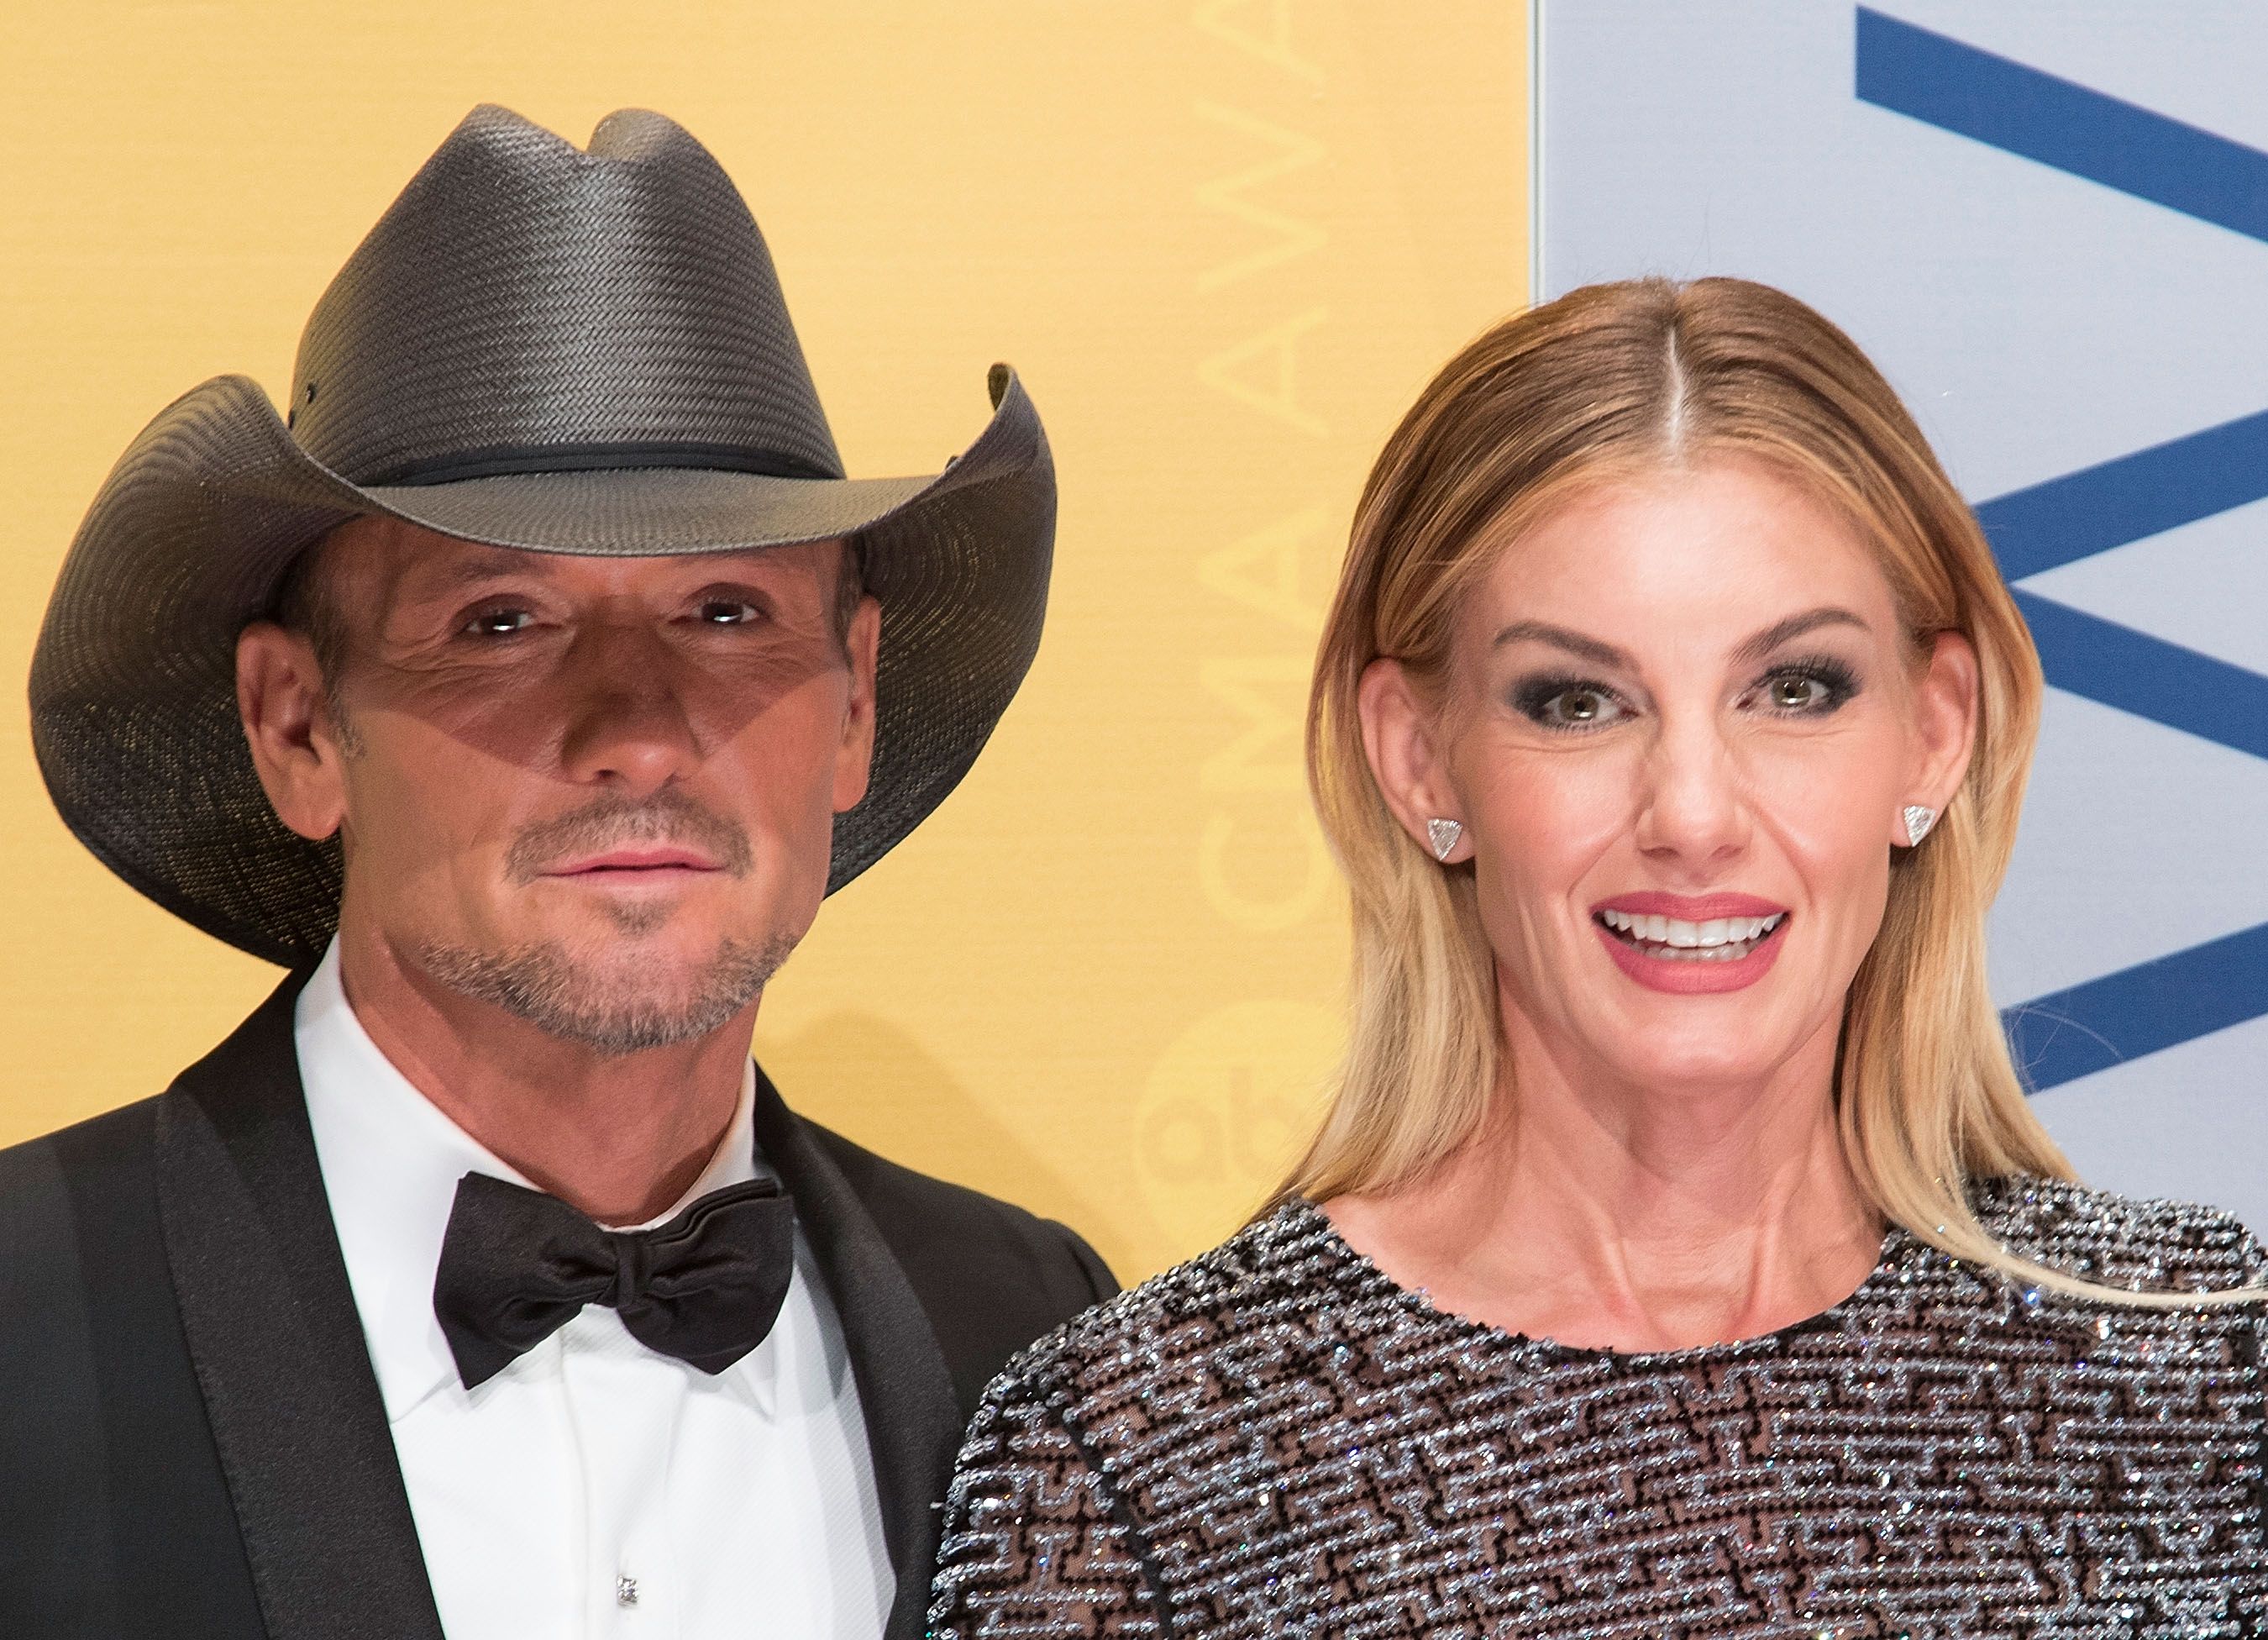 Tim McGraw and Faith Hill during the 50th annual CMA Awards at the Bridgestone Arena on November 2, 2016. | Photo: Getty Images